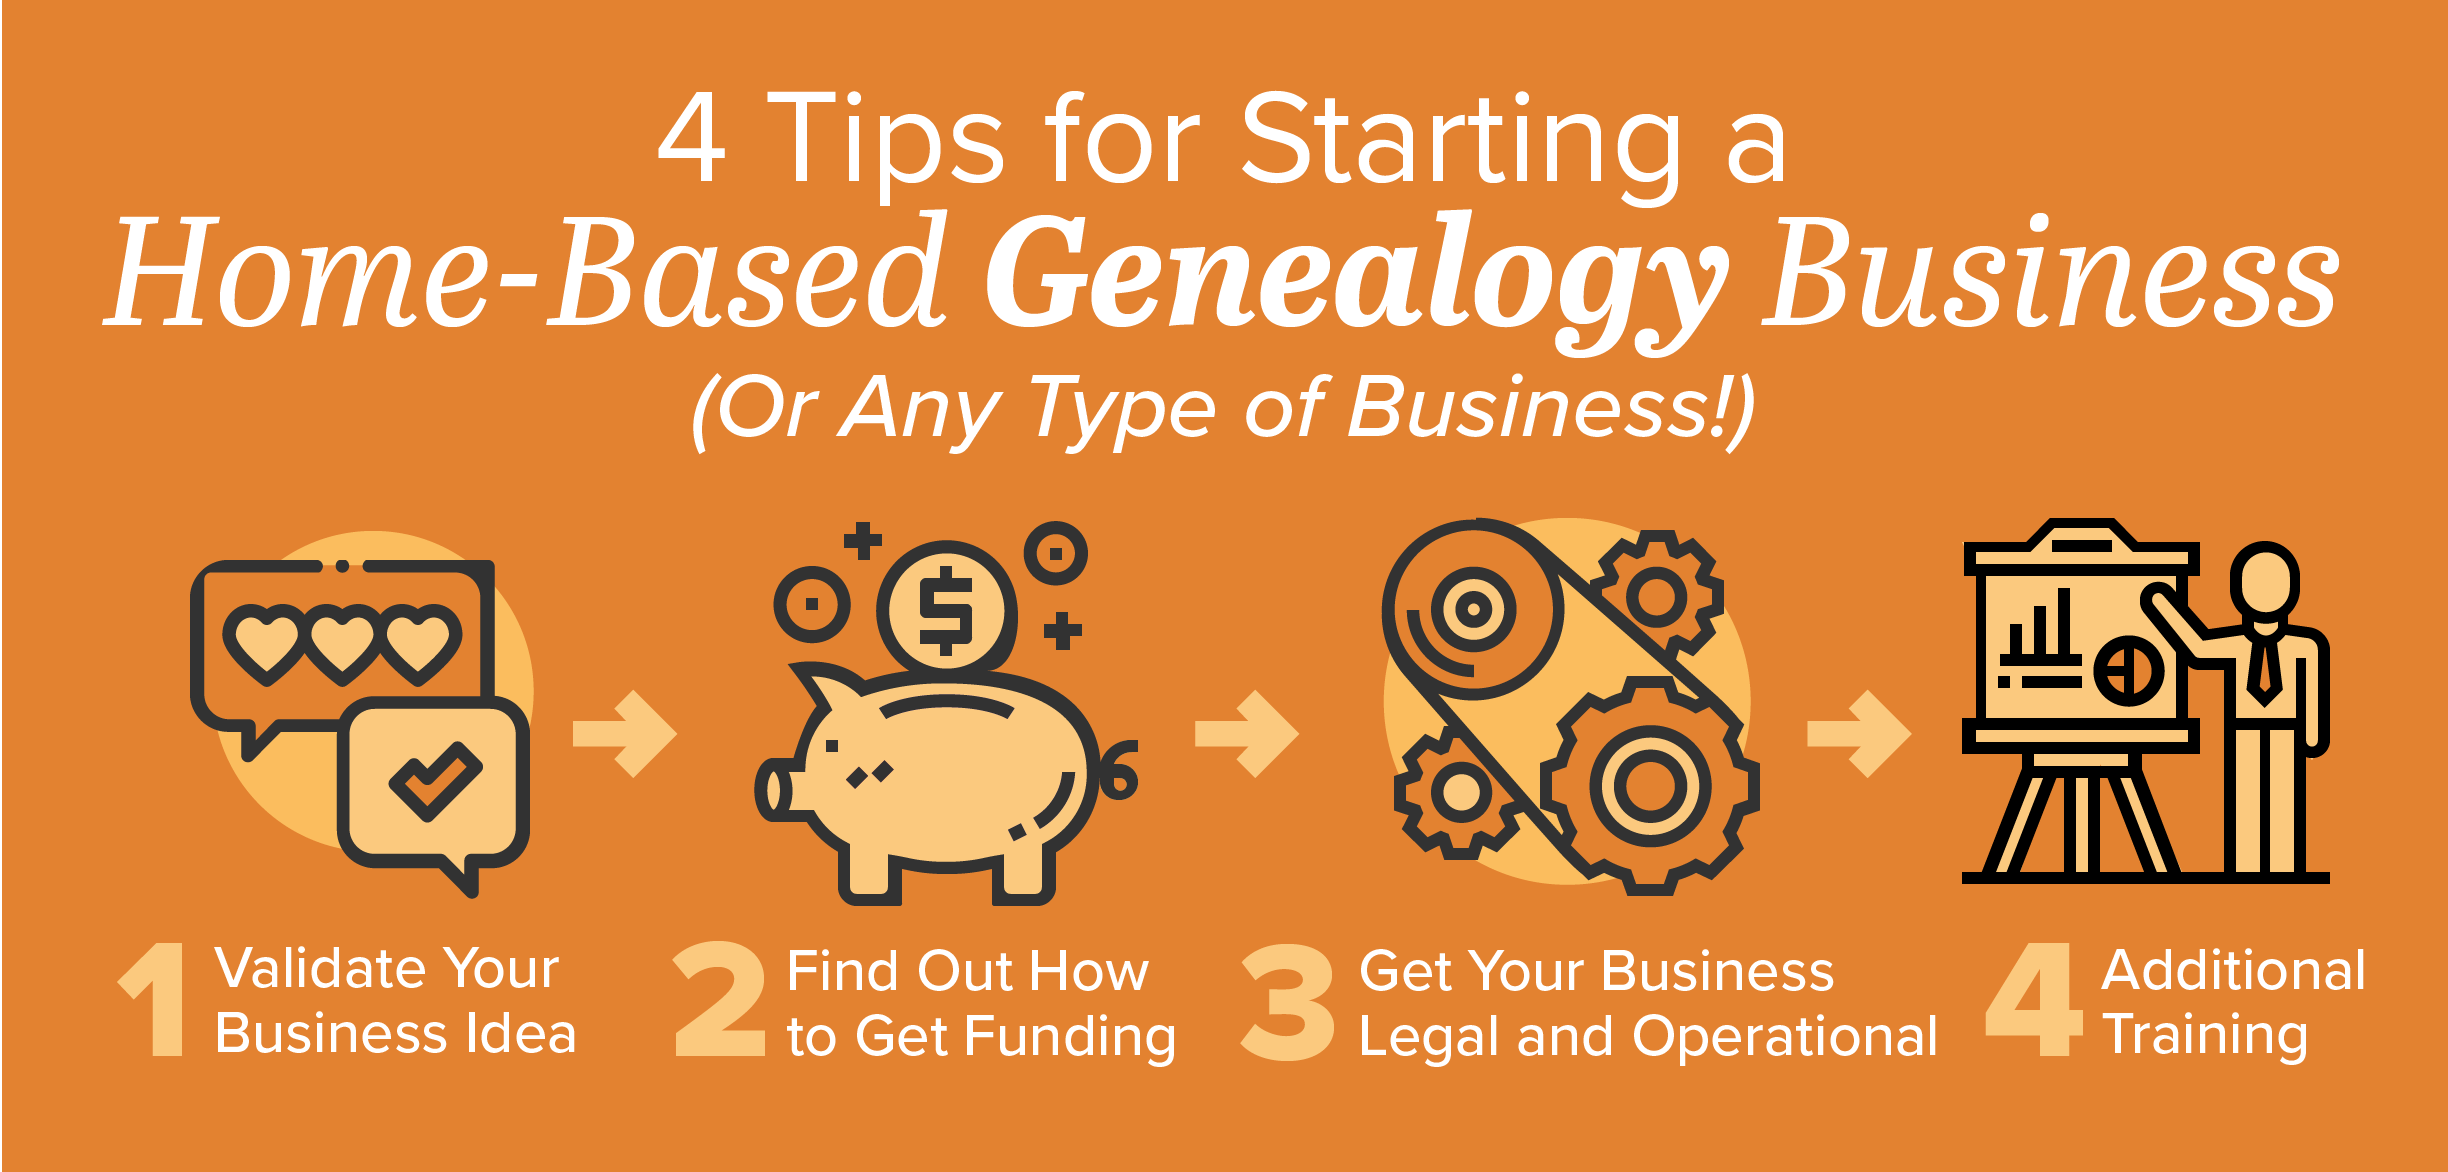 Turn Your Genealogy Hobby Into a Side Business If you have a passion for history and get as excited about spending the day deciphering historical documents as some people do summiting a mountain, you may be just the person to start a genealogy business.